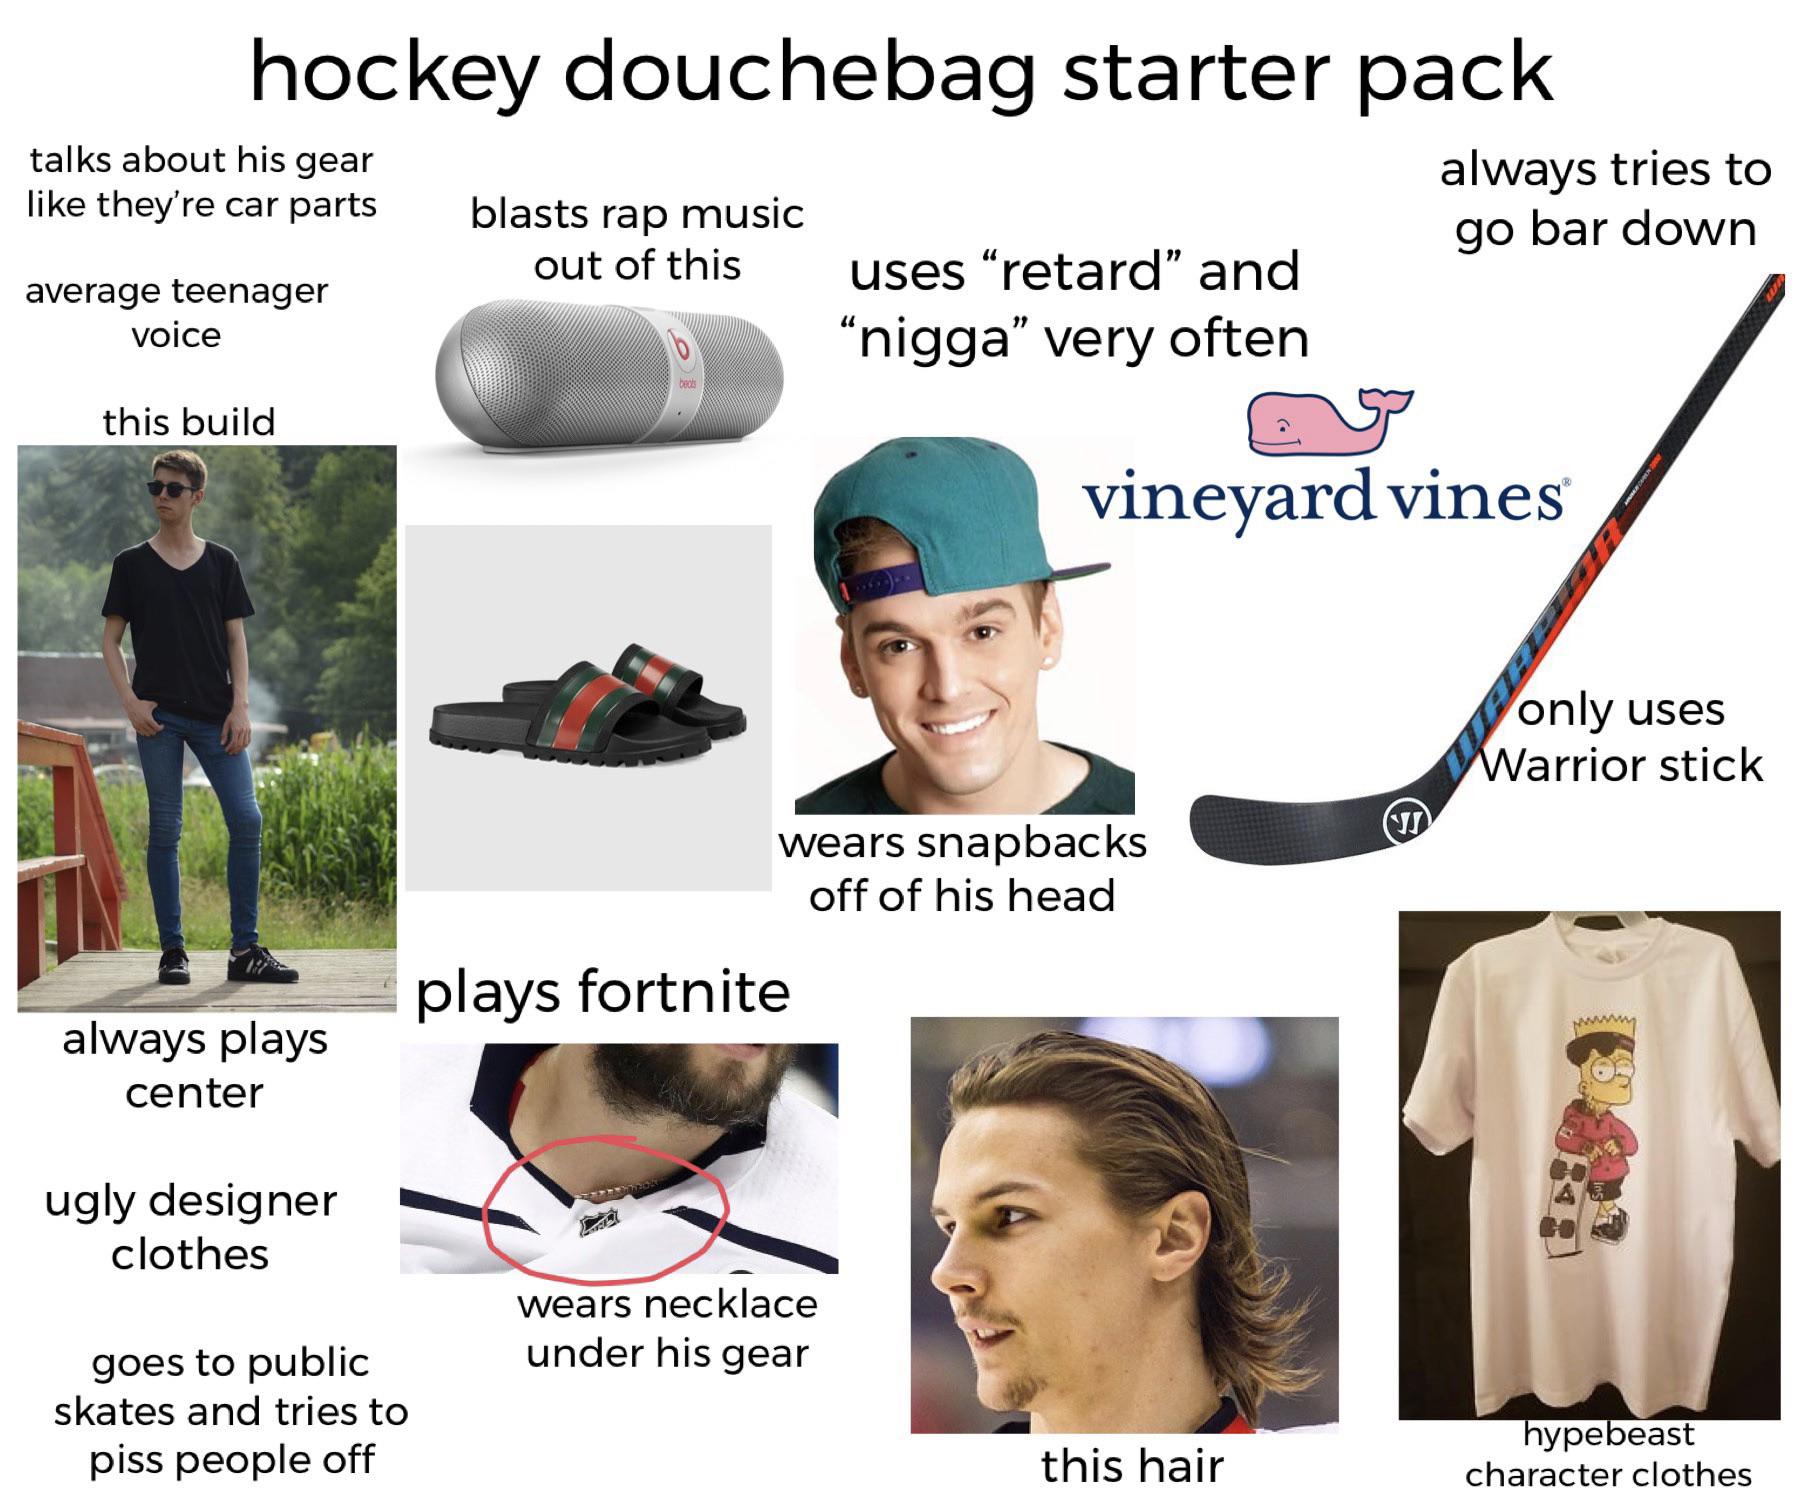 wannabe hypebeast starter pack - hockey douchebag starter pack talks about his gear they're car parts blasts rap music out of this always tries to go bar down average teenager voice uses retard" and nigga very often this build vineyard vines only uses War